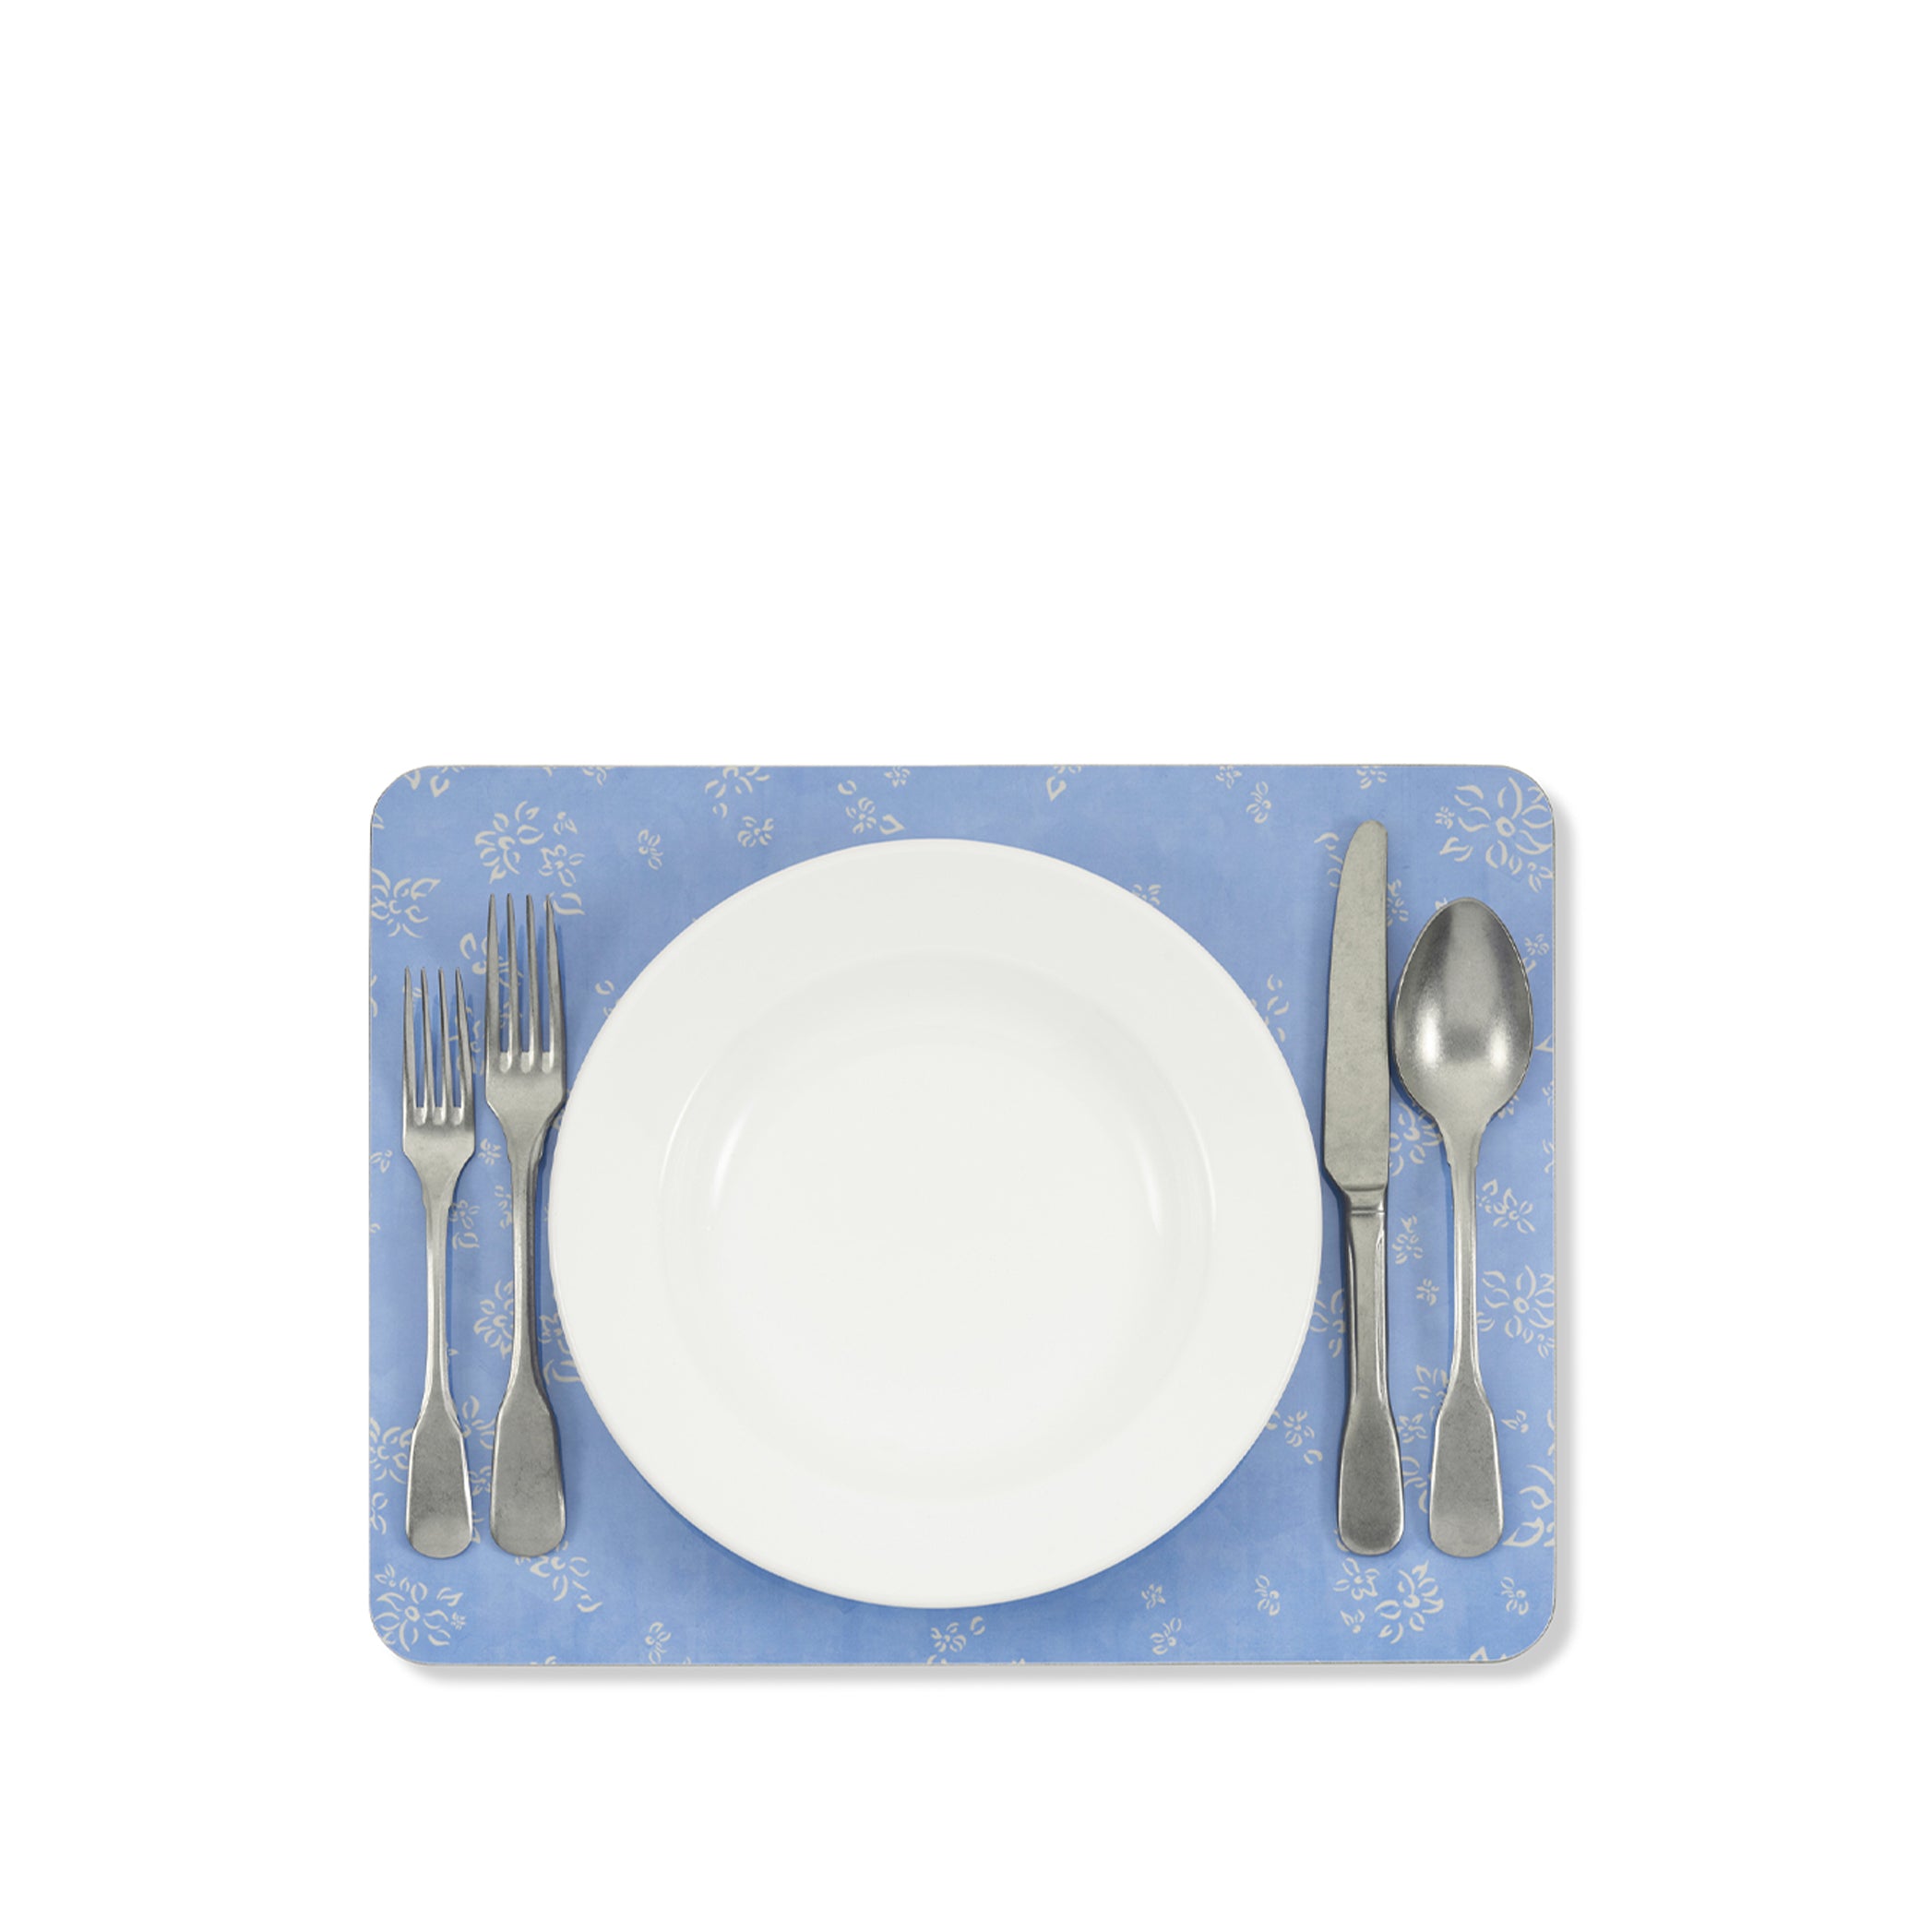 Falling Flower Cork-Backed Placemat in Pale Blue